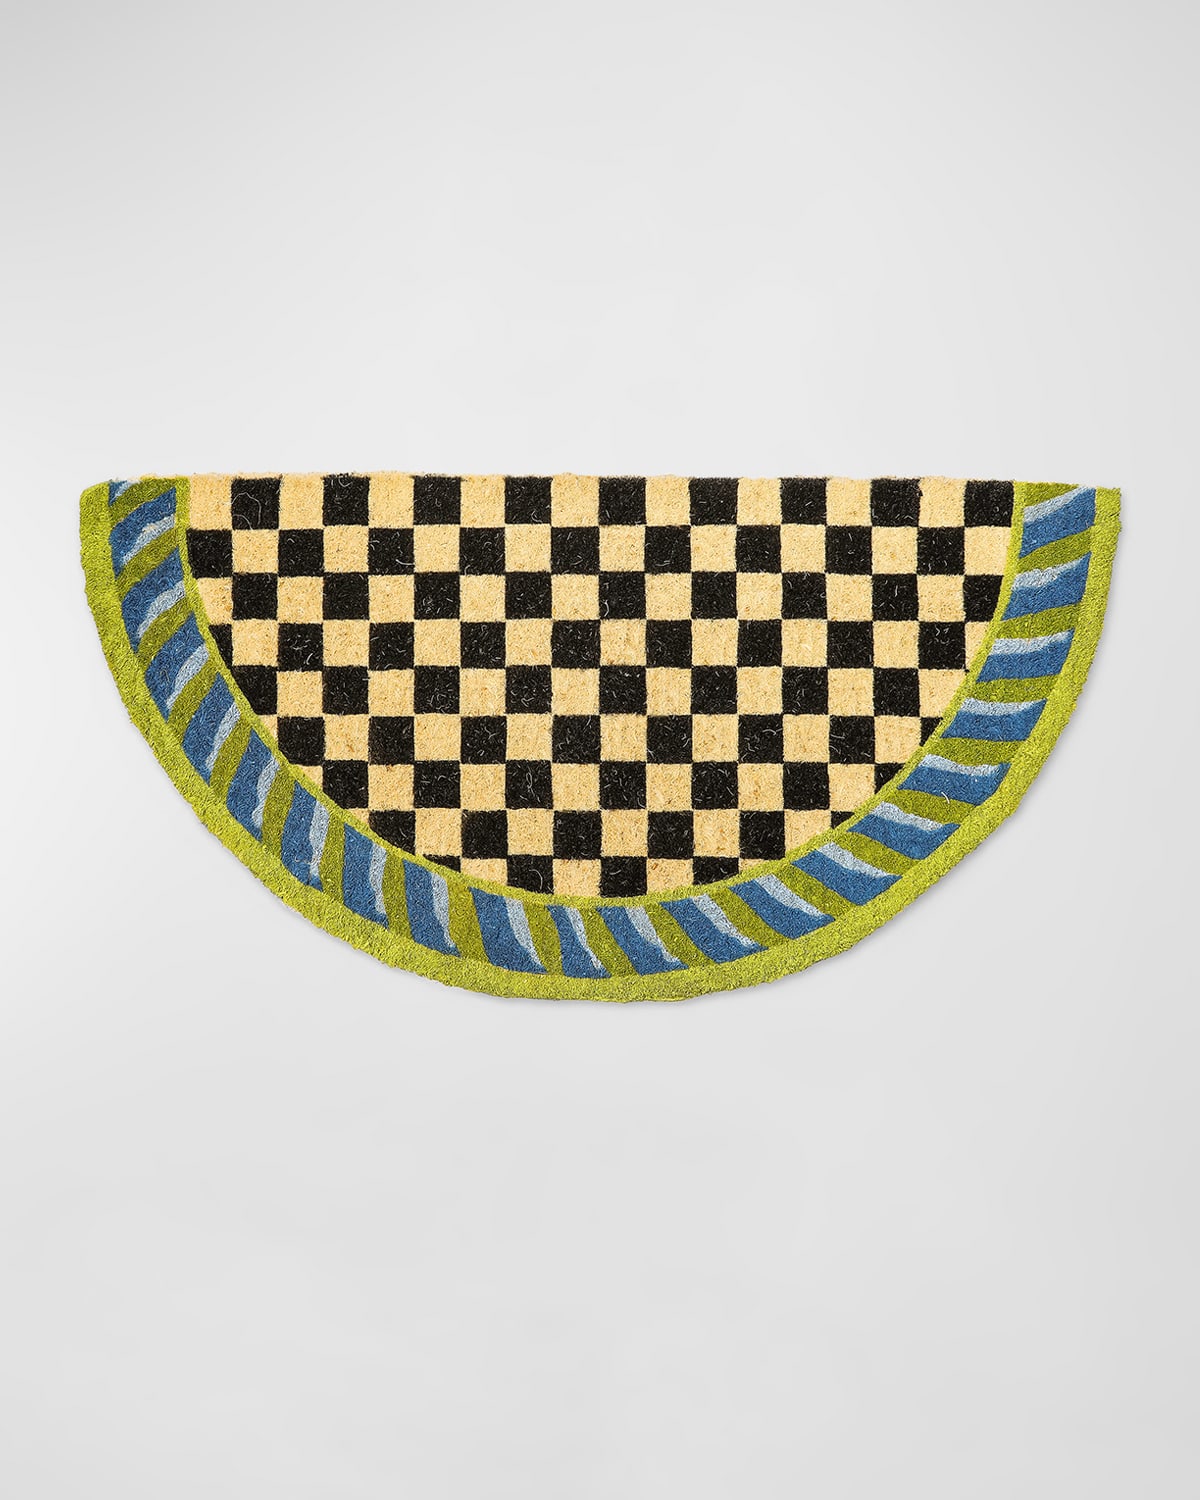 Mackenzie-childs Half Round Courtly Check Entrance Mat